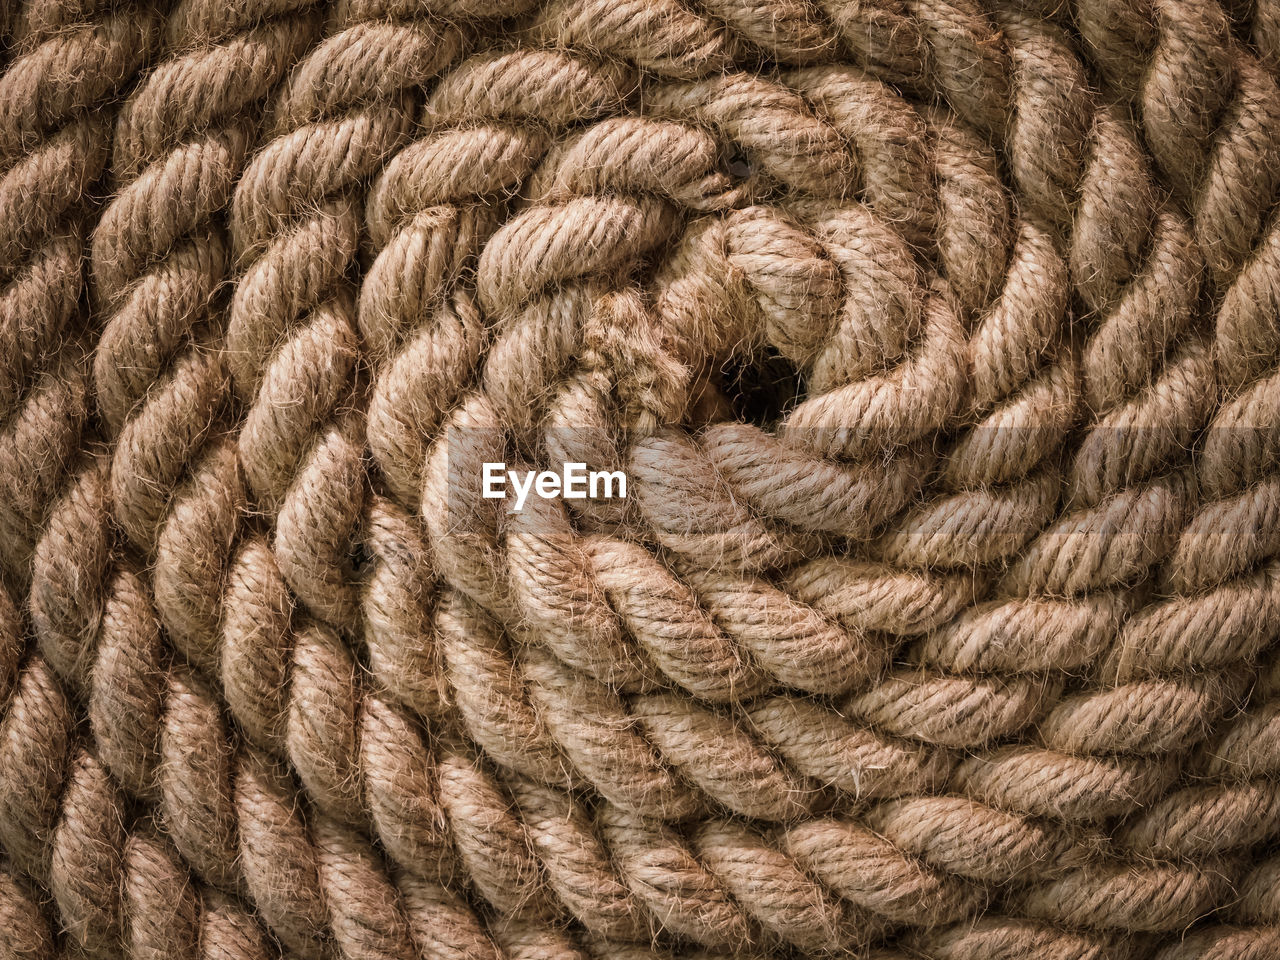 Rolled up nautical rope, flat lay and close up view